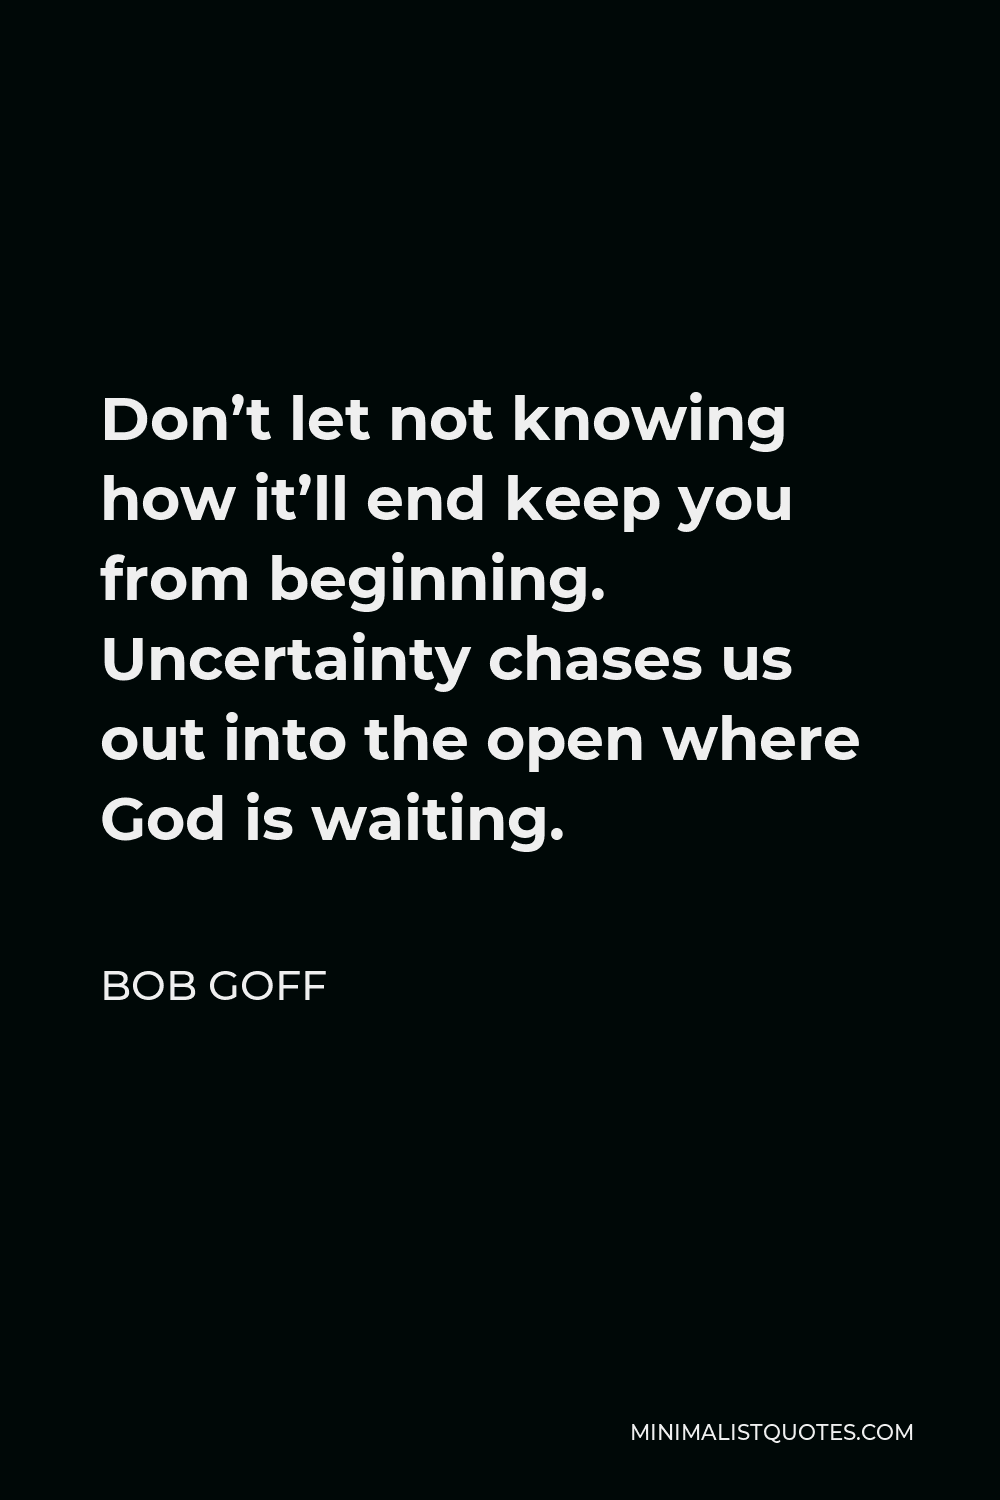 Bob Goff Quote - Don’t let not knowing how it’ll end keep you from beginning. Uncertainty chases us out into the open where God is waiting.